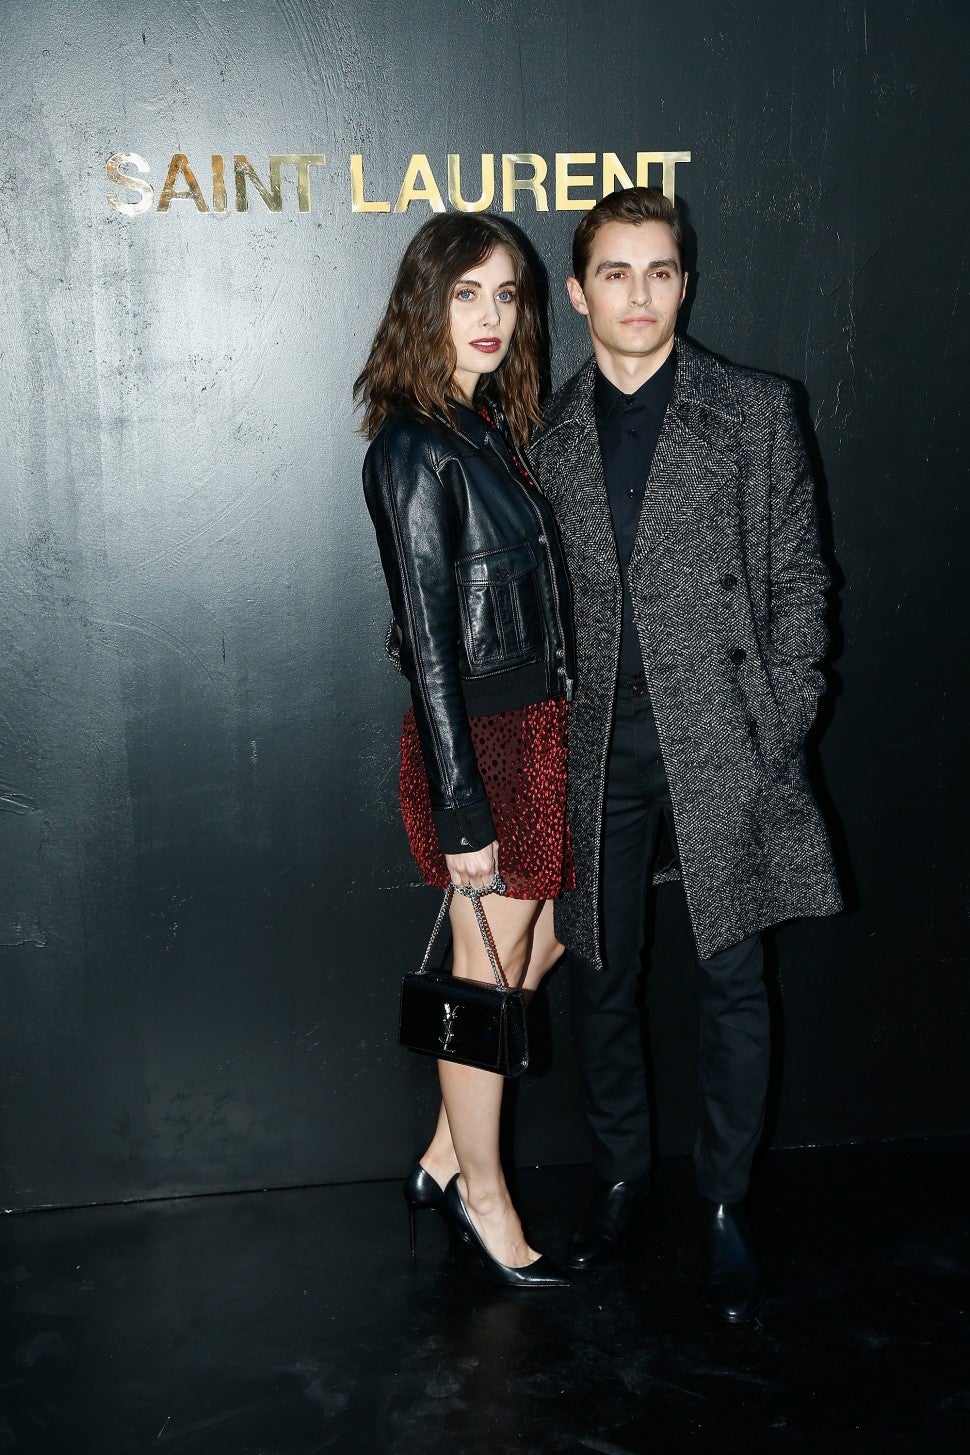 Alison Brie and Dave Franco at Saint Laurent